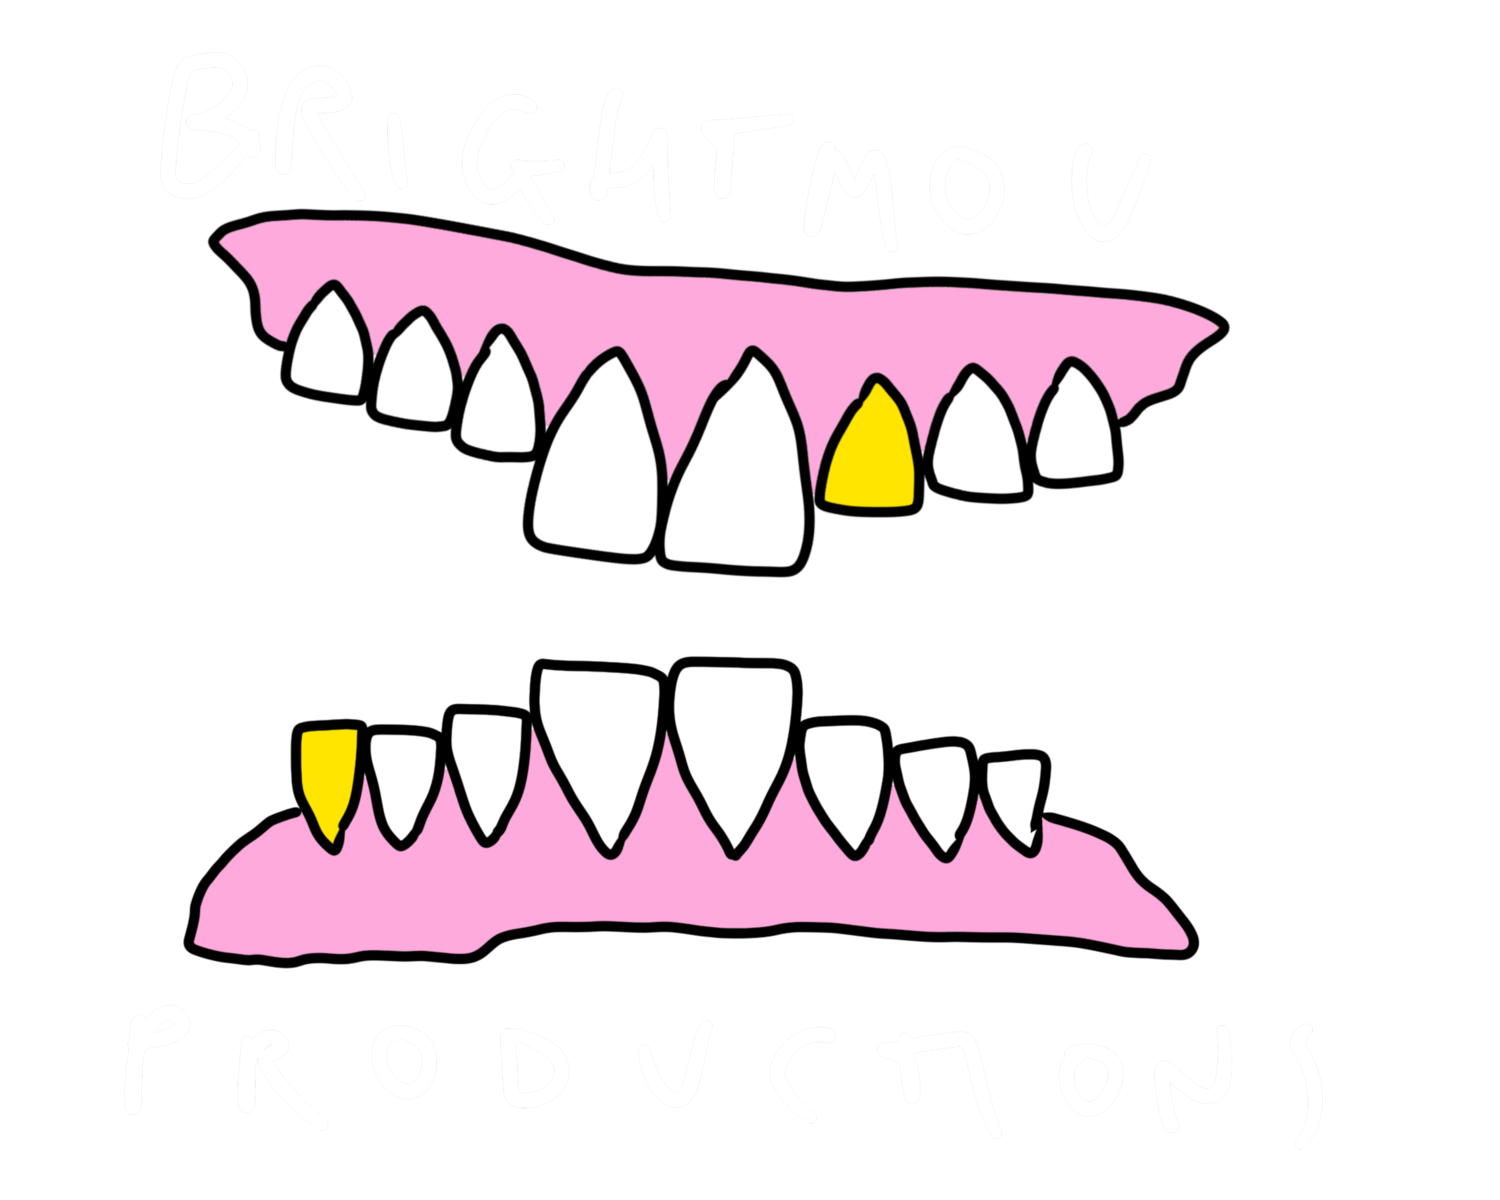 Brightmouth Productions